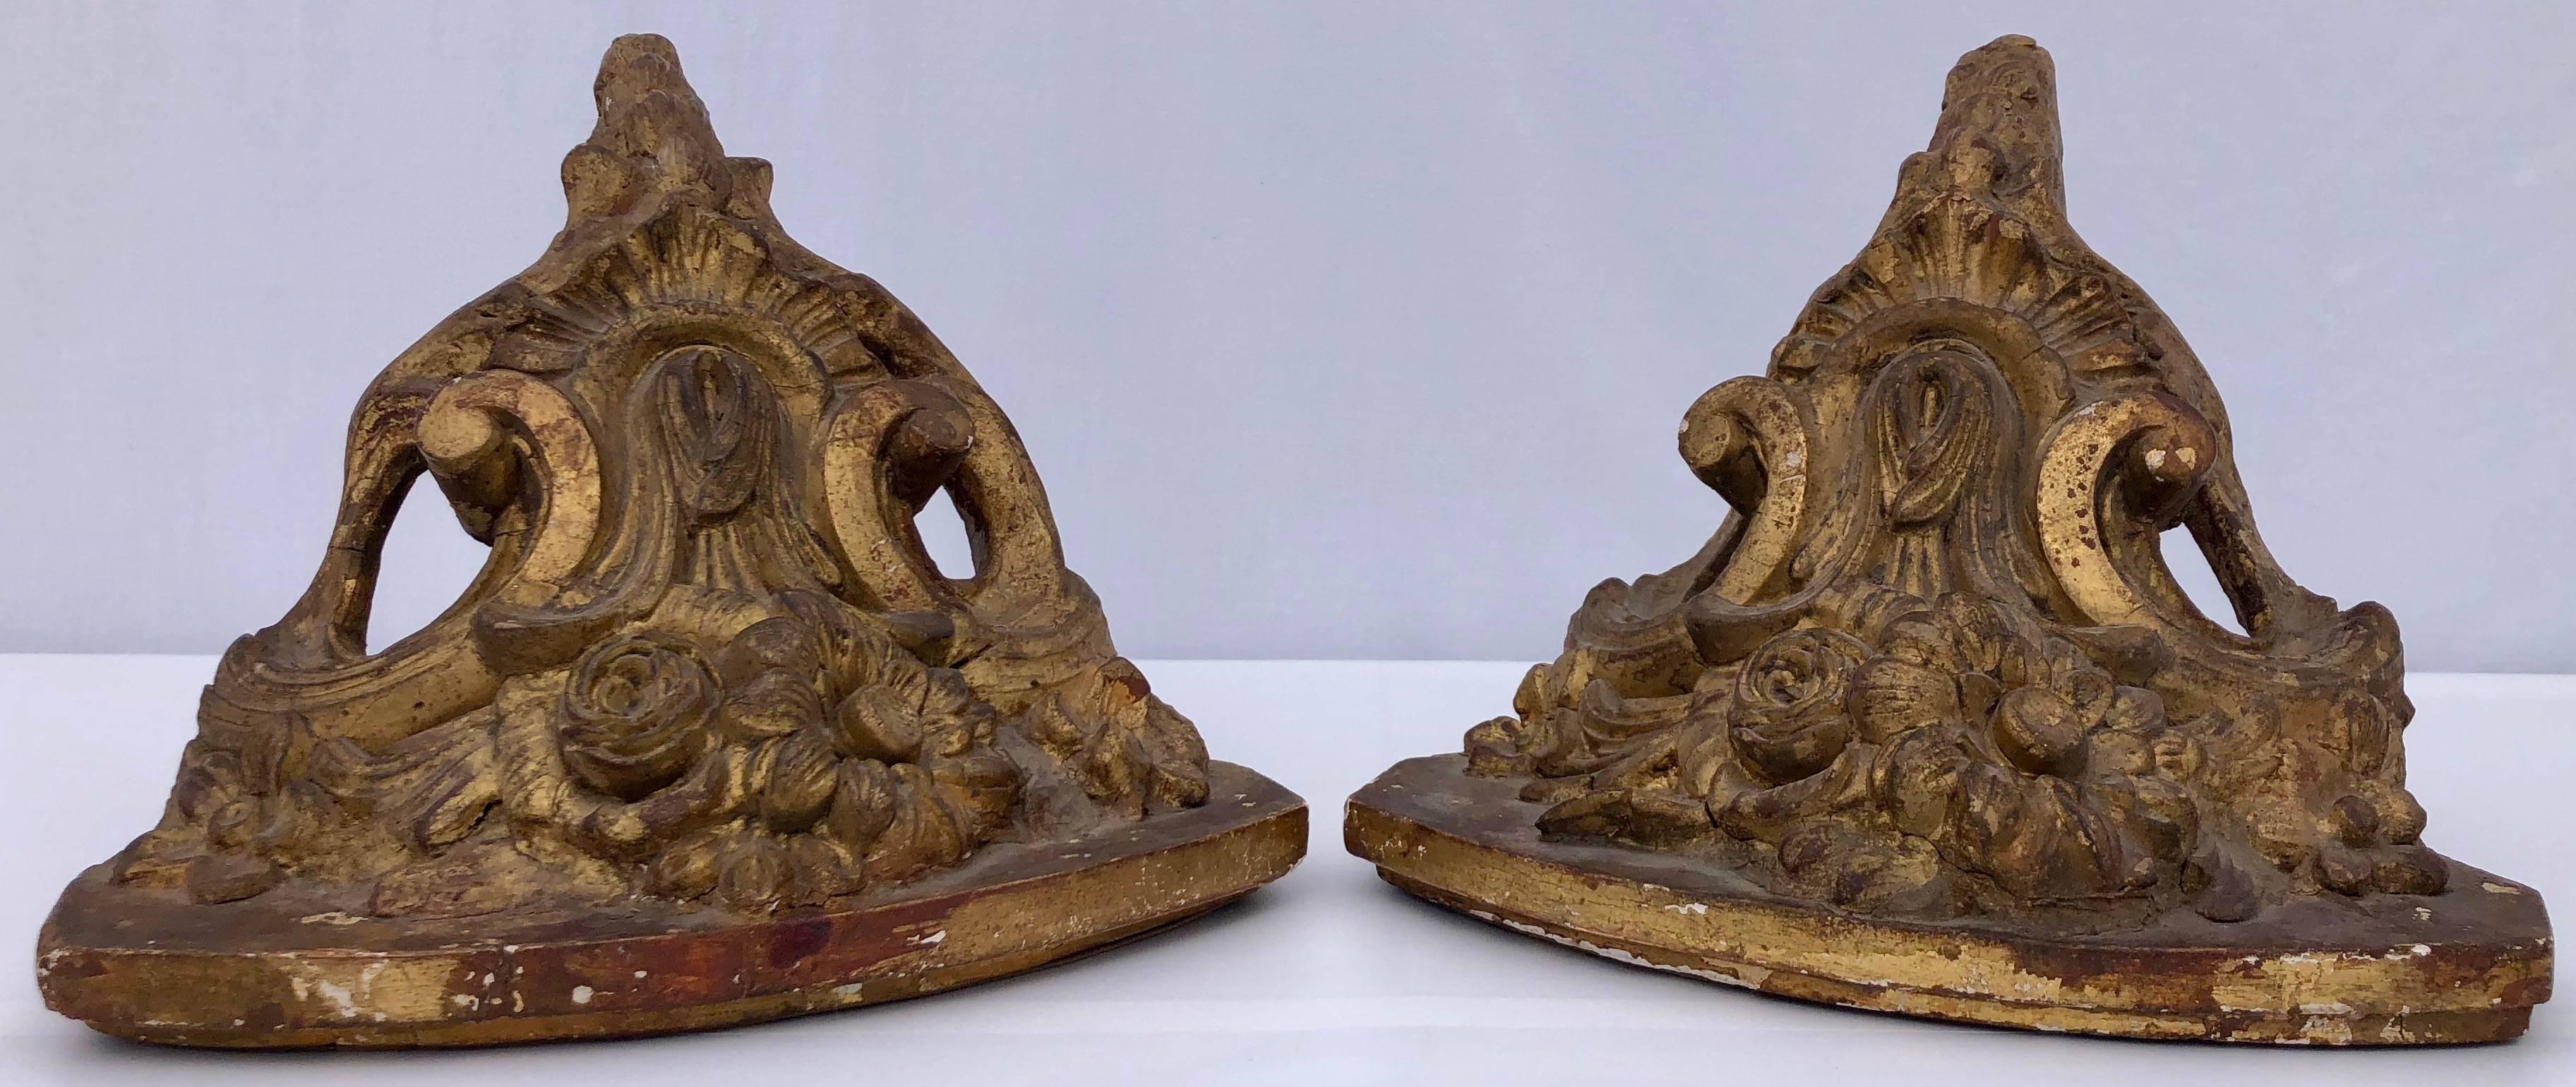 These are a beautiful pair of French antique gilt corner wall sconces or shelves from the 1800s in cast plaster with wood. They have an elegant design of flowers and scrolls with a gorgeous patina. These pieces will add a stunning decorative touch